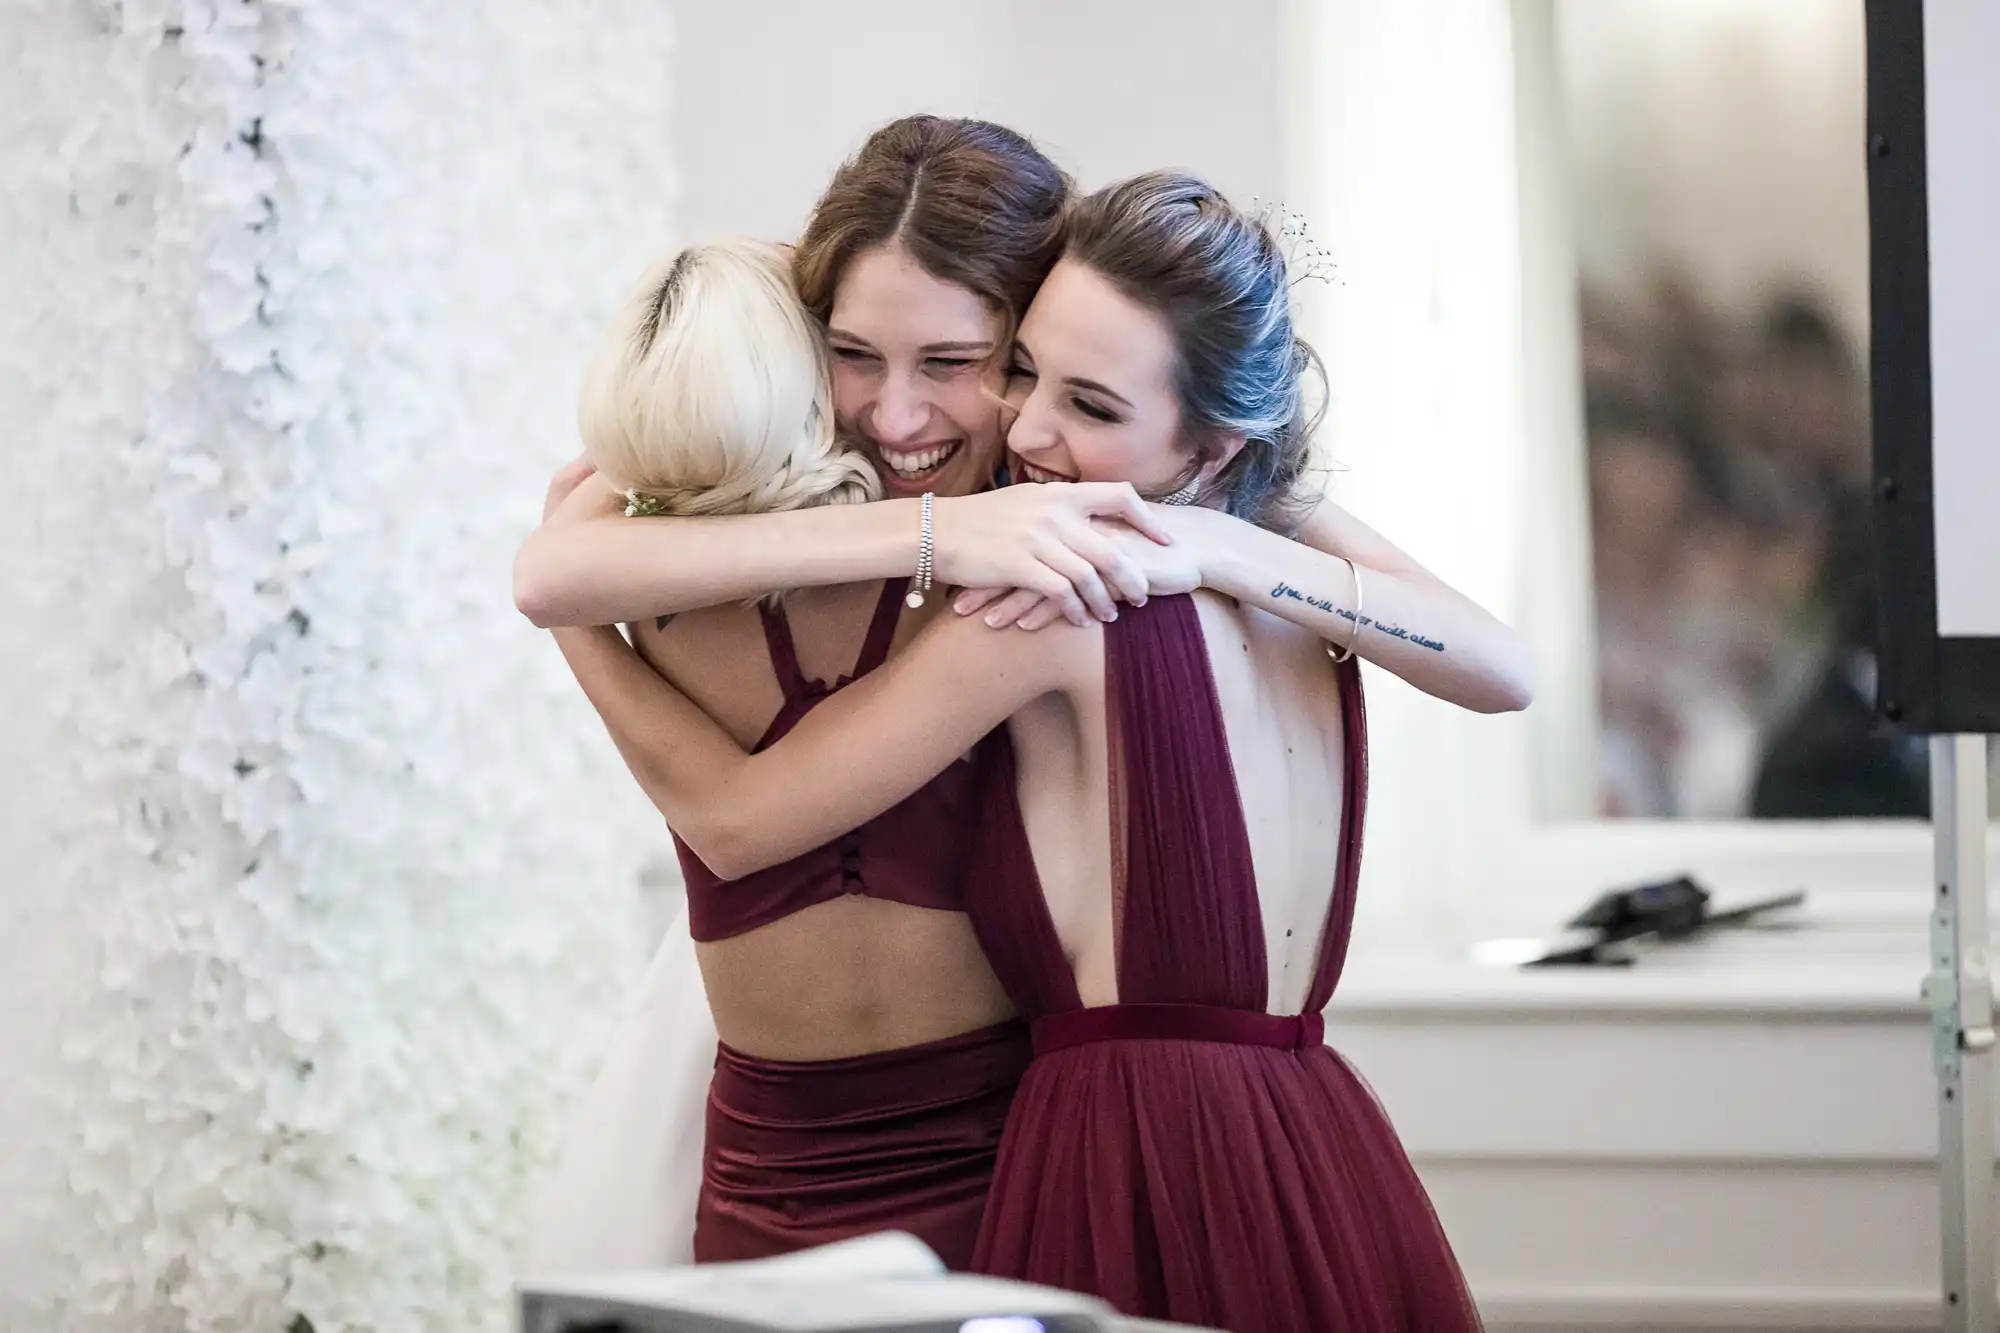 Bride and bridesmaids in formal dresses share a group hug, smiling and celebrating indoors with a white floral backdrop.